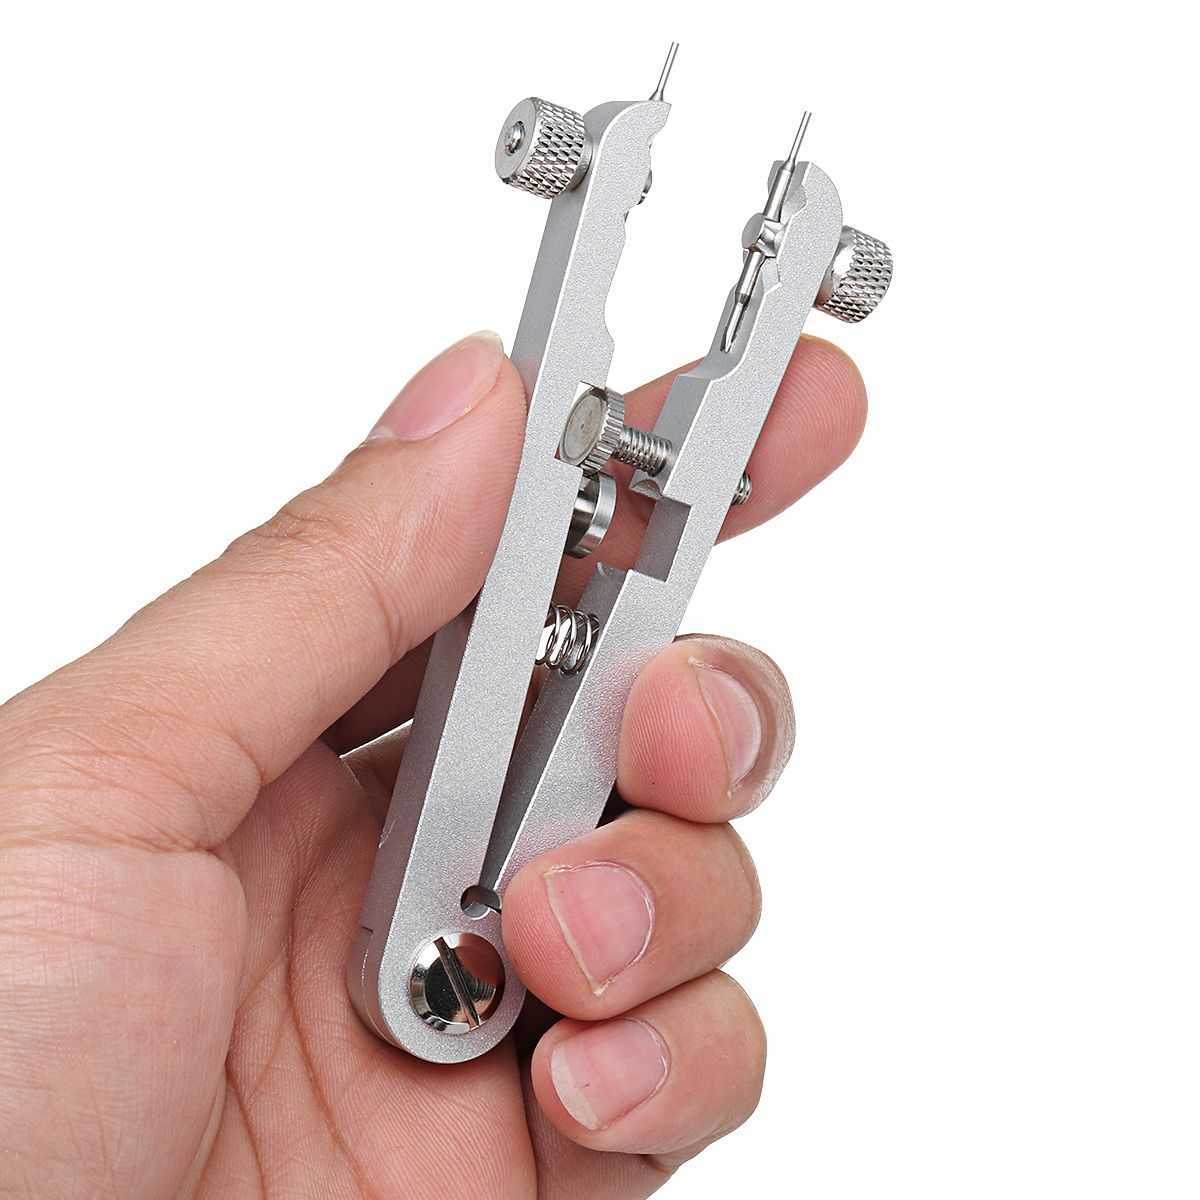 Watch-Bracelet-Spring-Bar-Standard-Plier-6825-Remover-Replace-Removing-Pliers-Tool-1319848